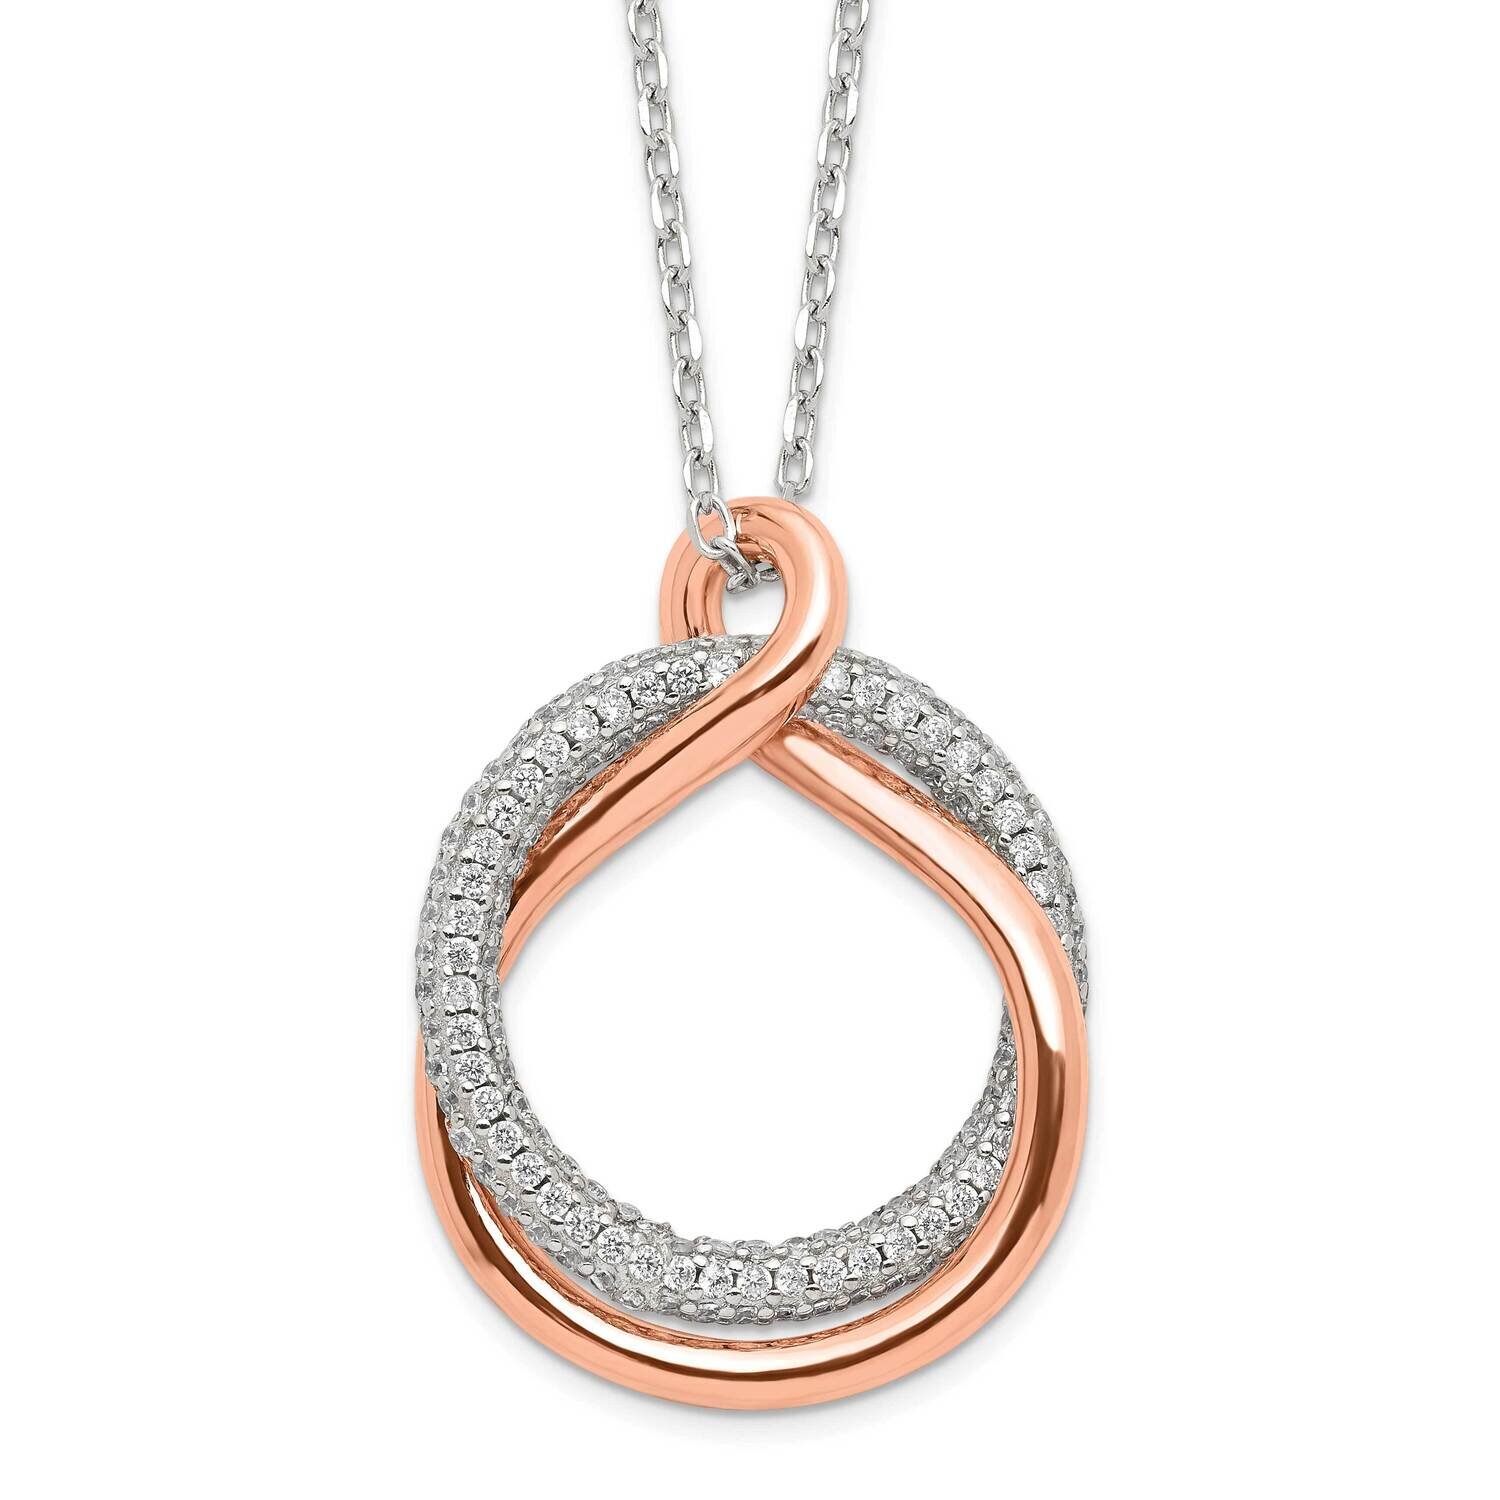 Polished Pave CZ Diamond Twist with 2 In Extender Necklace 15.5 Inch Sterling Silver Rose-Tone QG6109-15.5